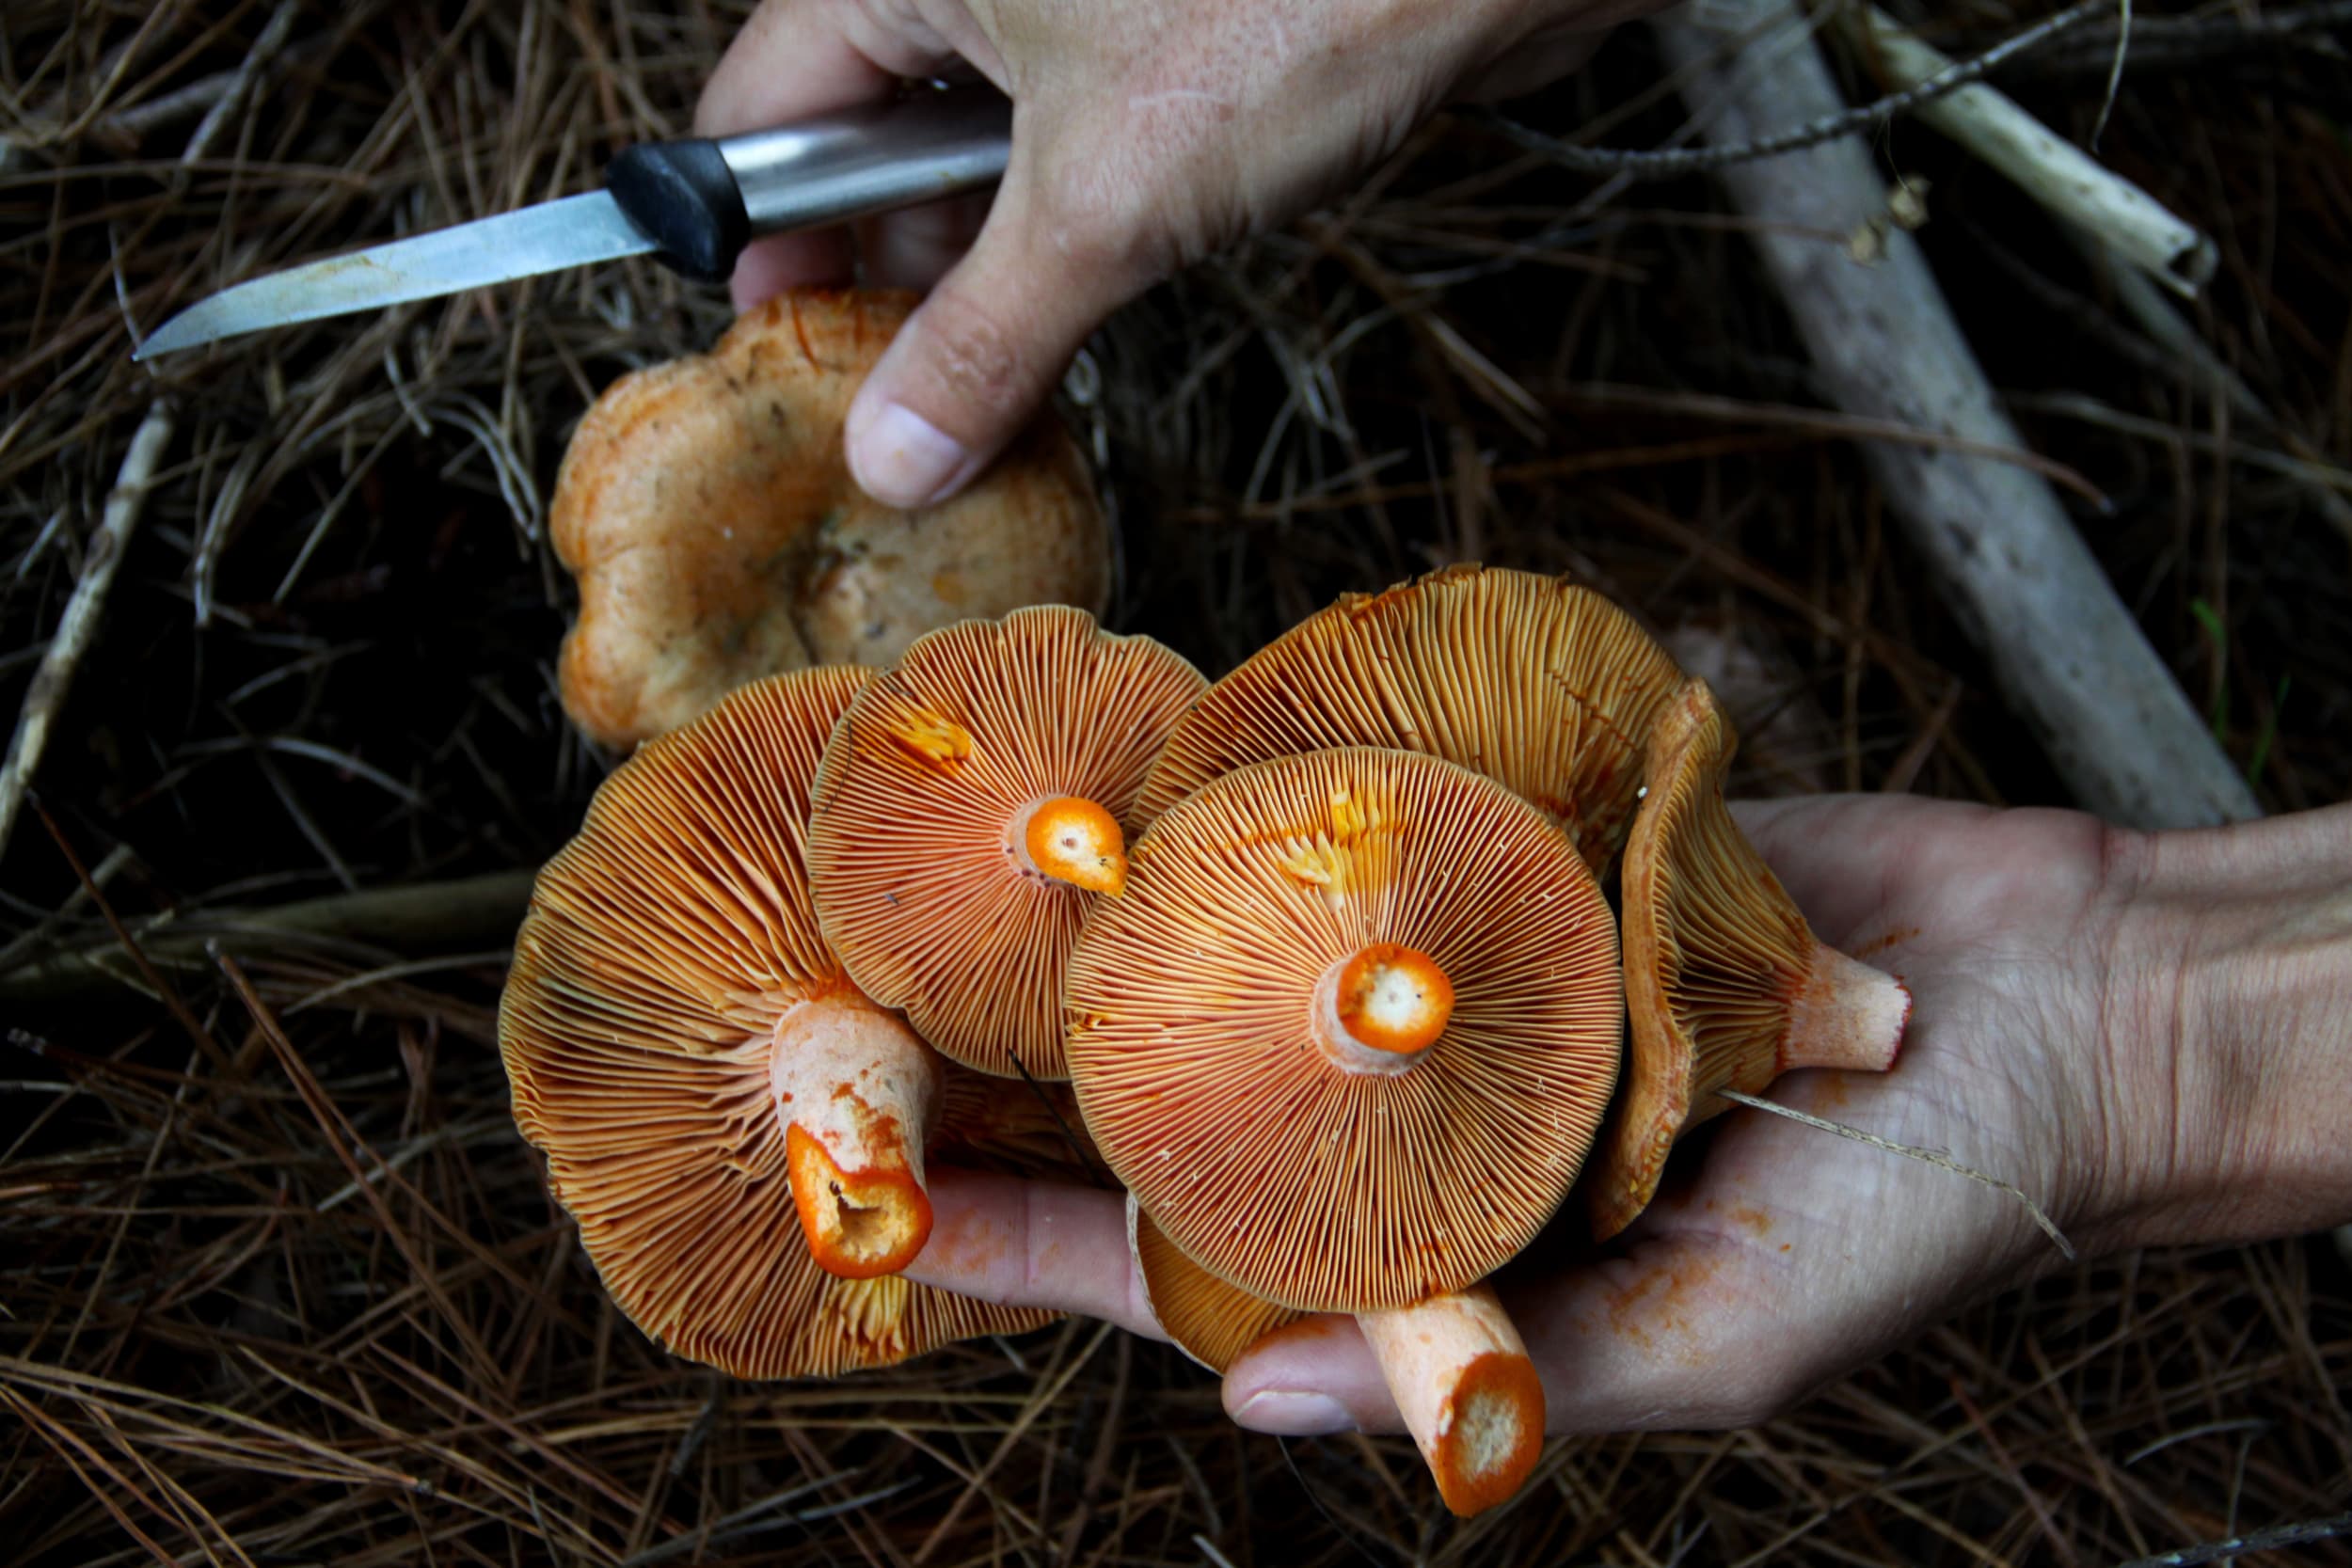 Foraging in the pine forests for wild pine ring mushrooms